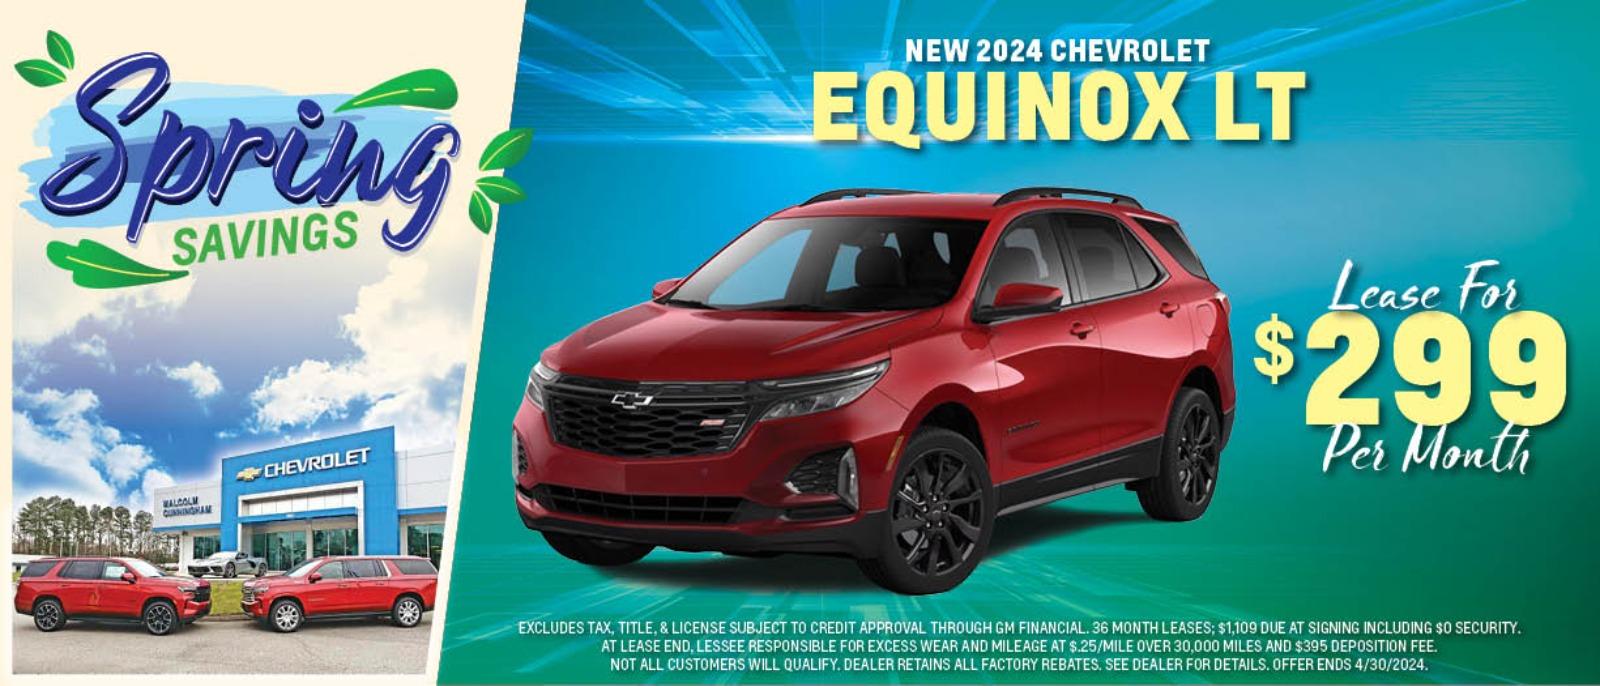 2024 Equinox | Lease for $299/mo